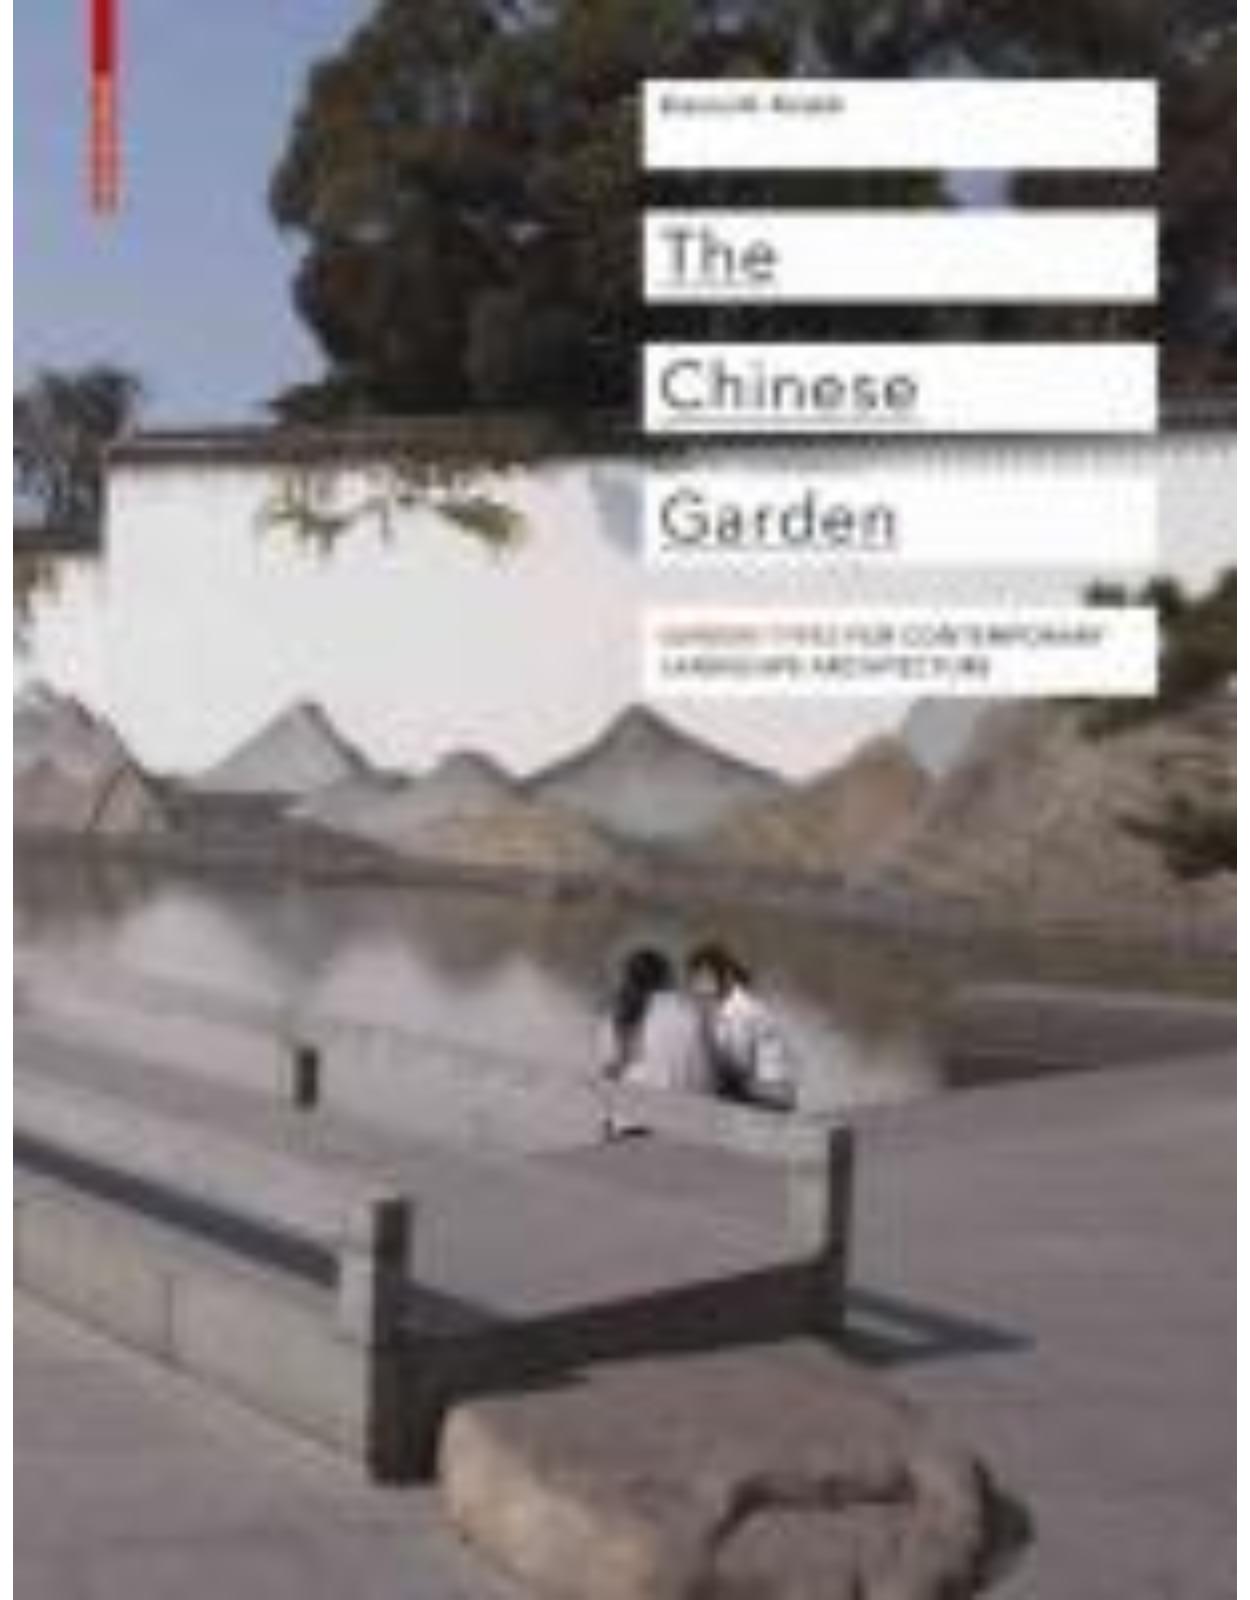 Chinese Garden: Garden Types for Contemporary Lanscape Architecture